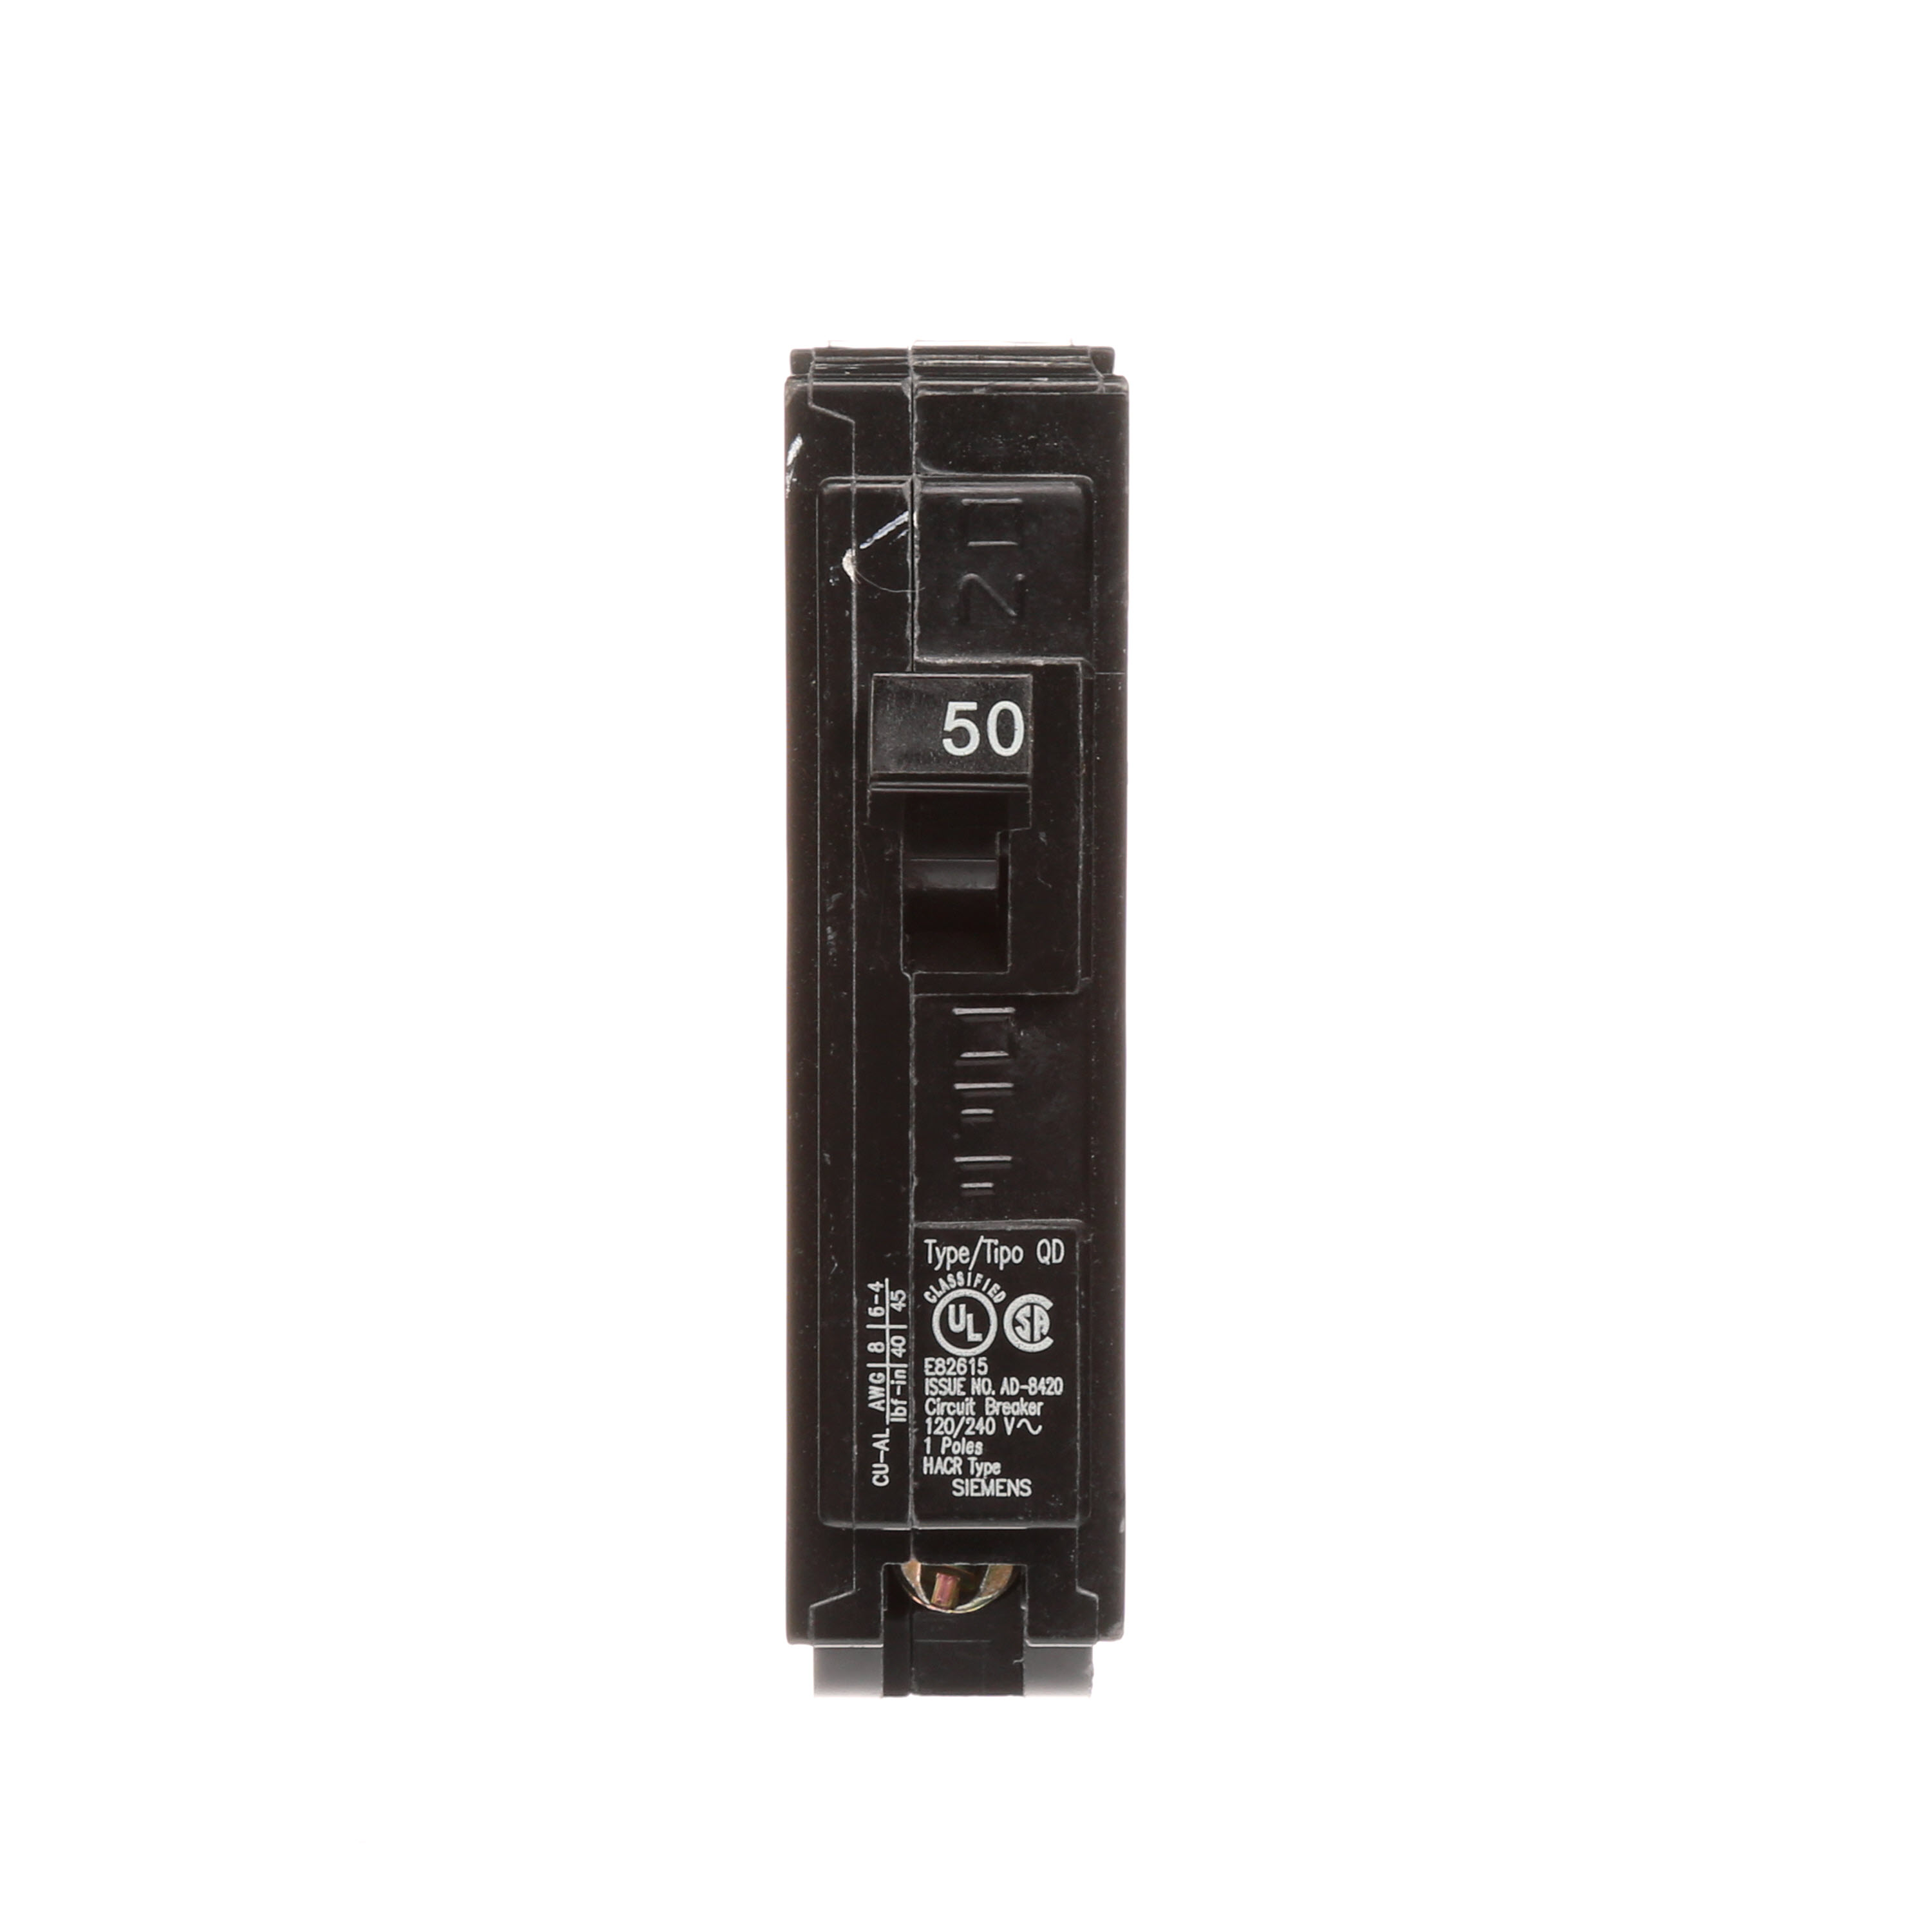 Siemens Low Voltage Residential Circuit Breakers. QD 3/4 IN Plug-In 1-Pole circuit breaker. Rated 120V (50A) AIR (10 kA). Special features HACR rated, UL listed and classified.